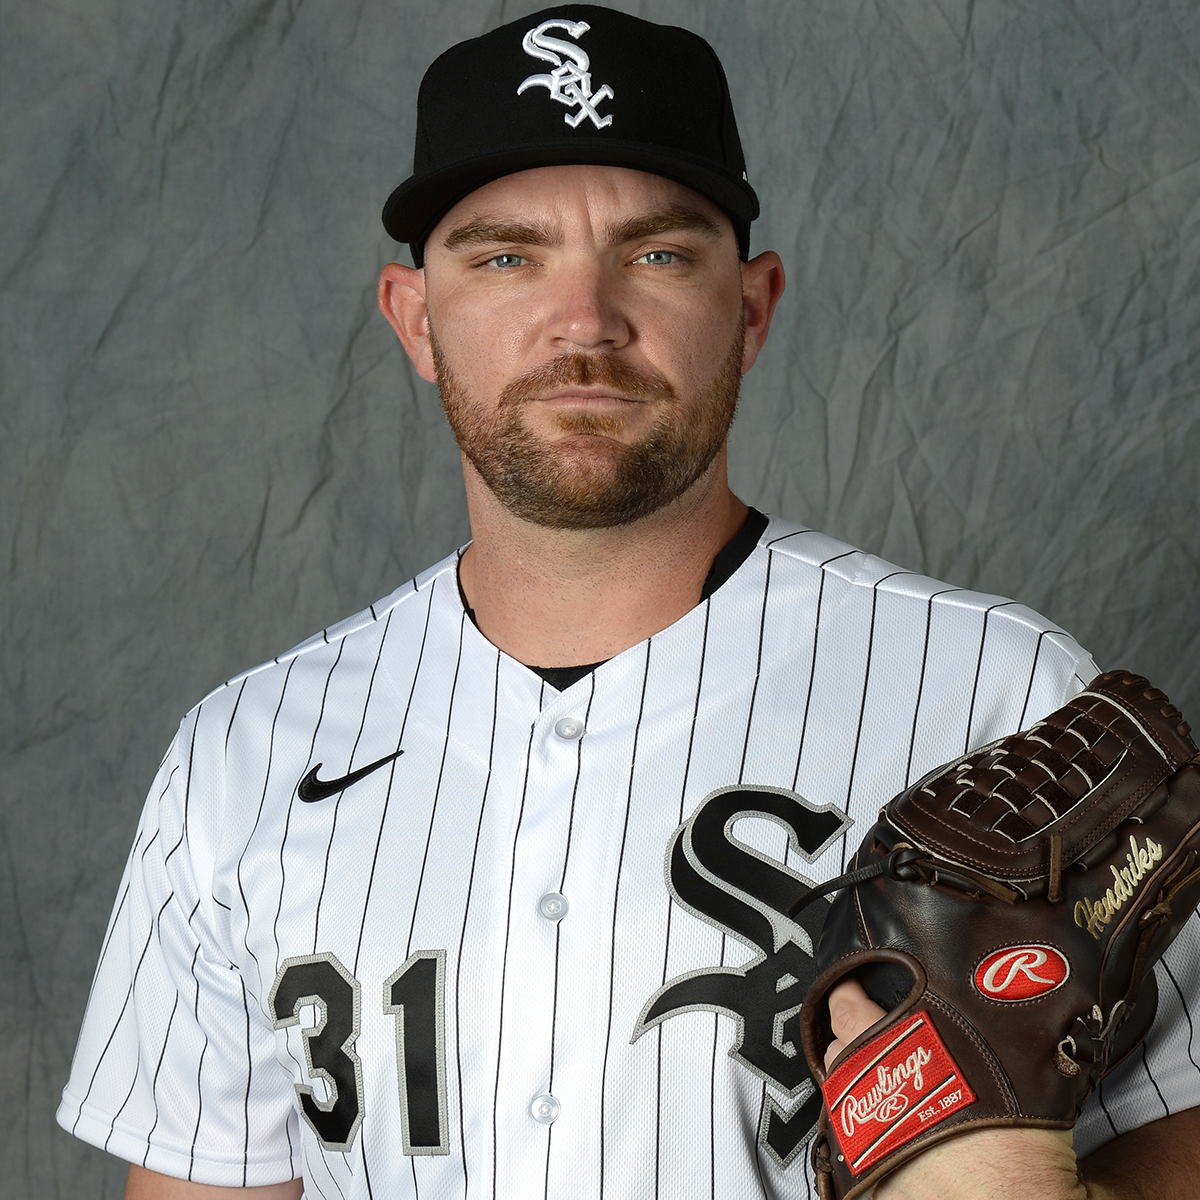 Liam Hendriks to return to Chicago White Sox after cancer treatment